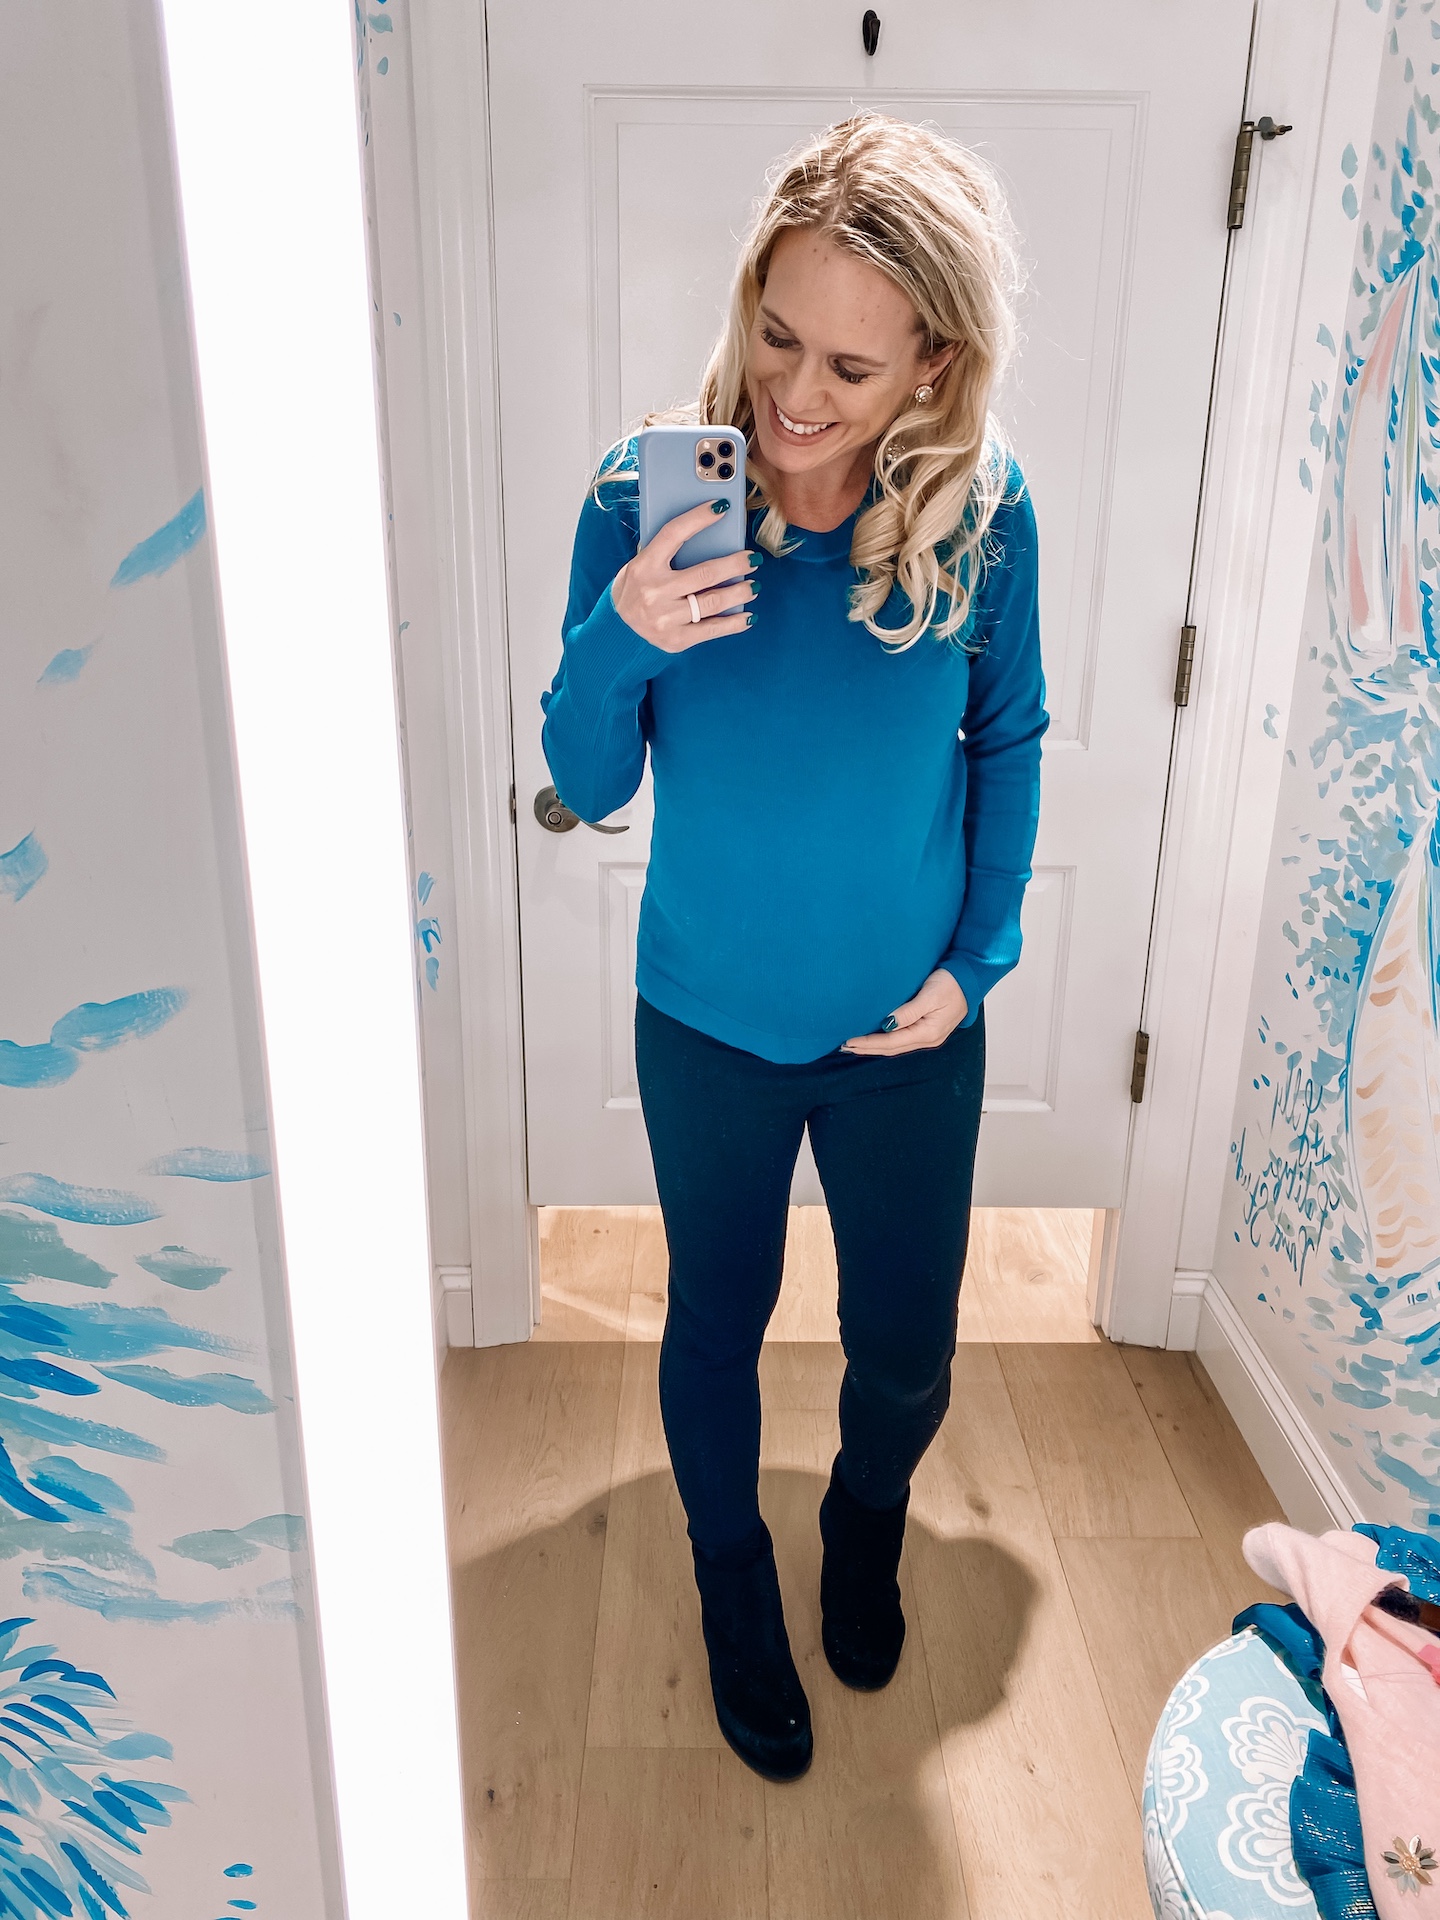 Lilly Pulitzer Holiday | Lilly Pulitzer sweater